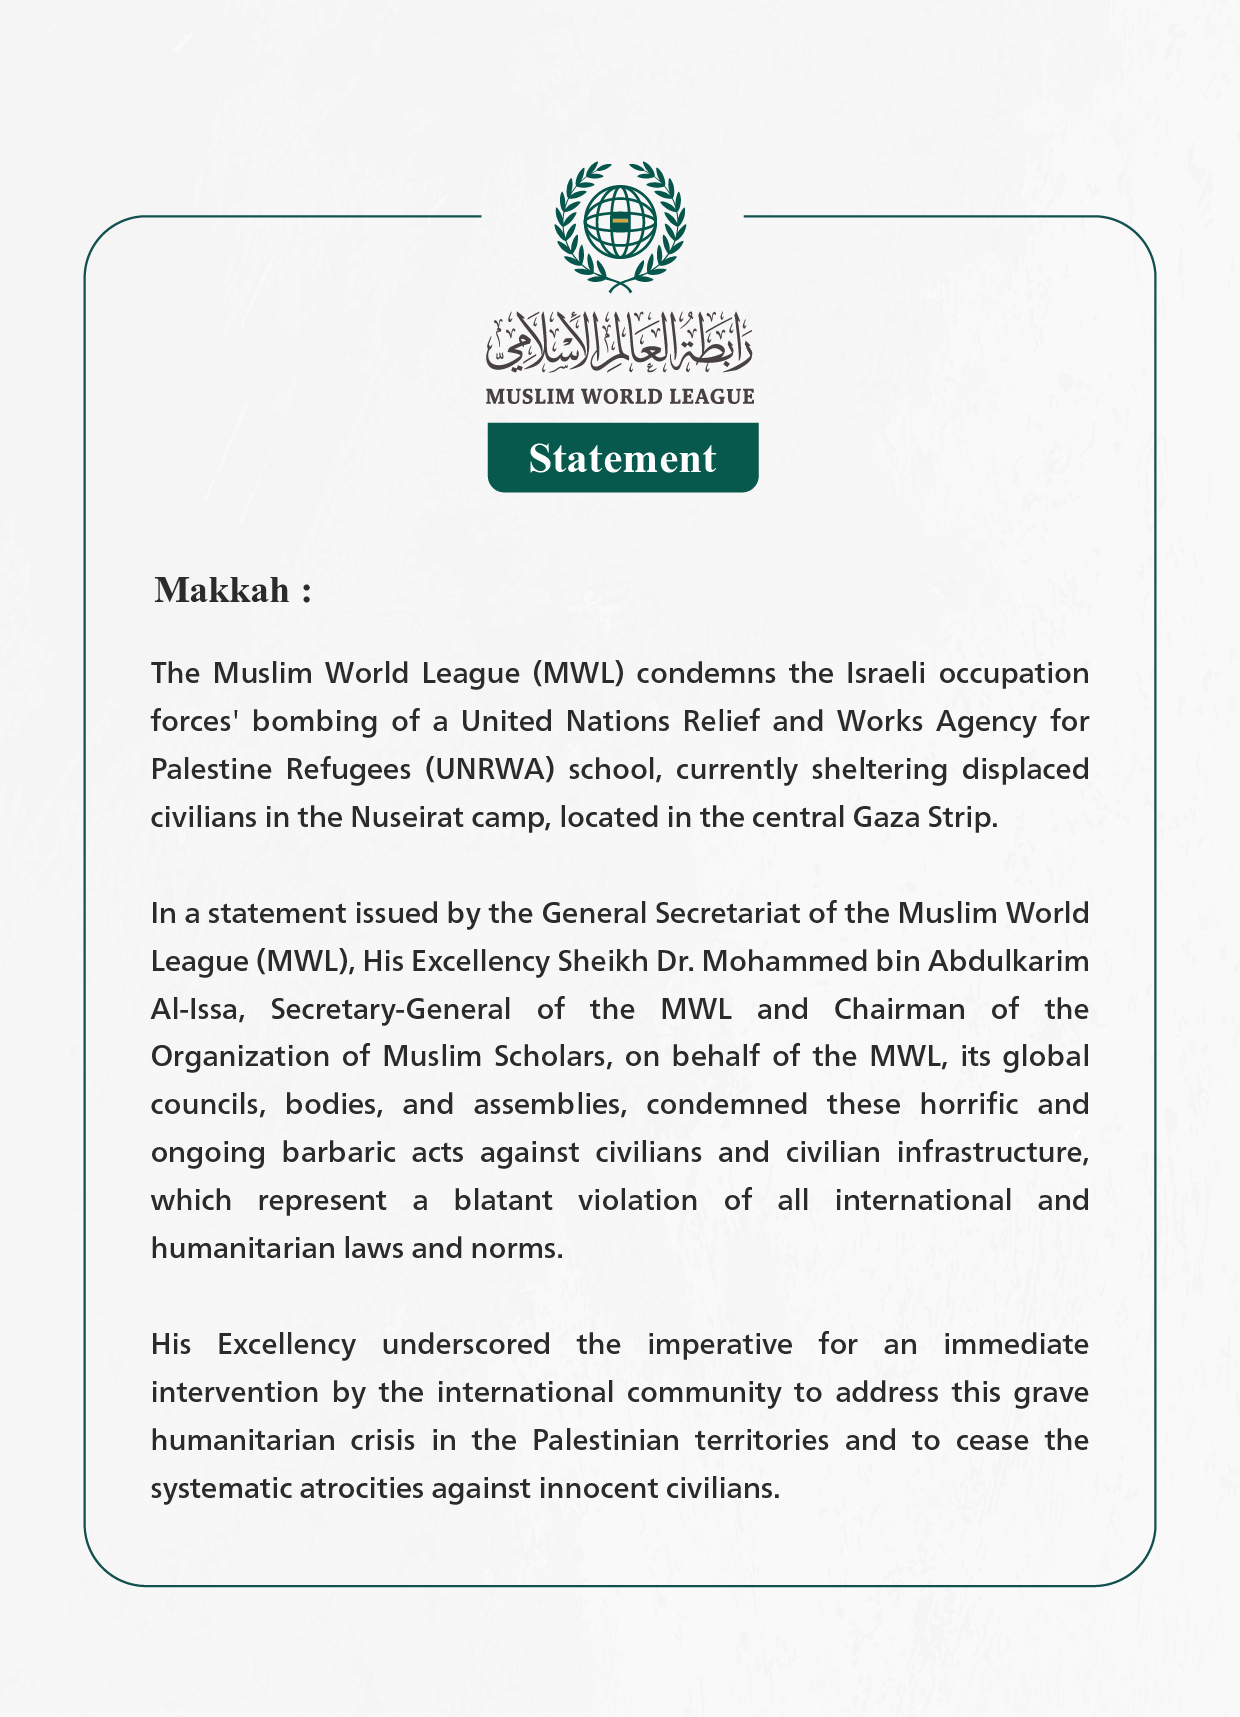 The Muslim World League (MWL) condemns the Israeli occupation forces' bombing of a United Nations Relief and Works Agency for Palestine Refugees (UNRWA) school